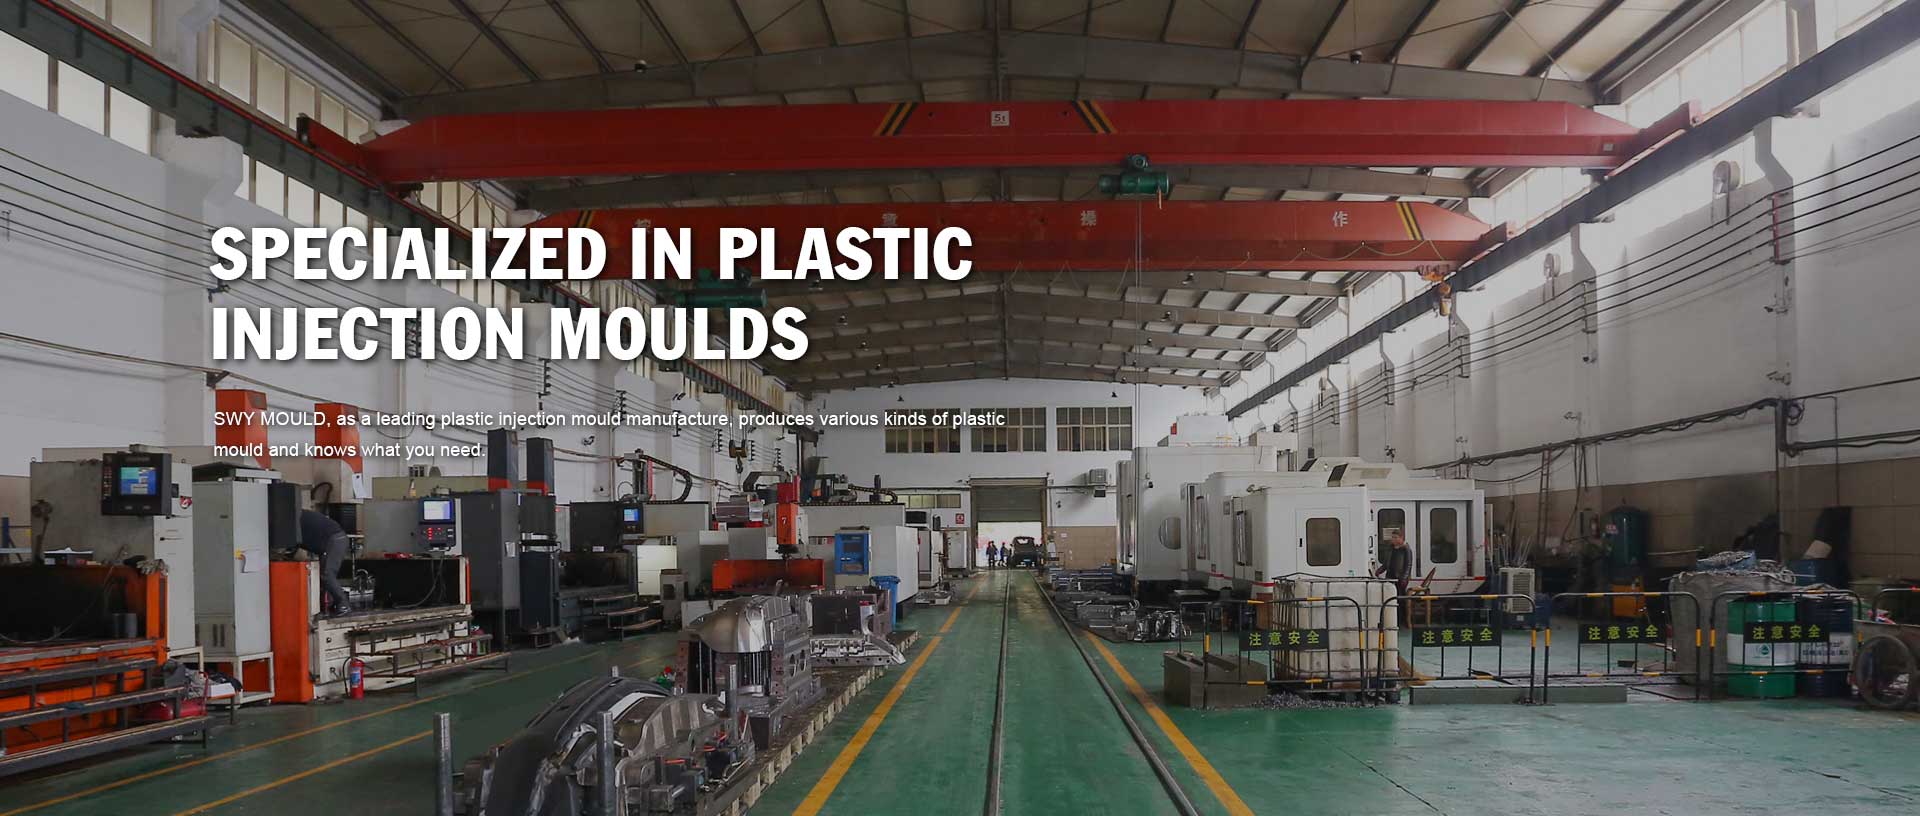 Injection Mould Manufacturers